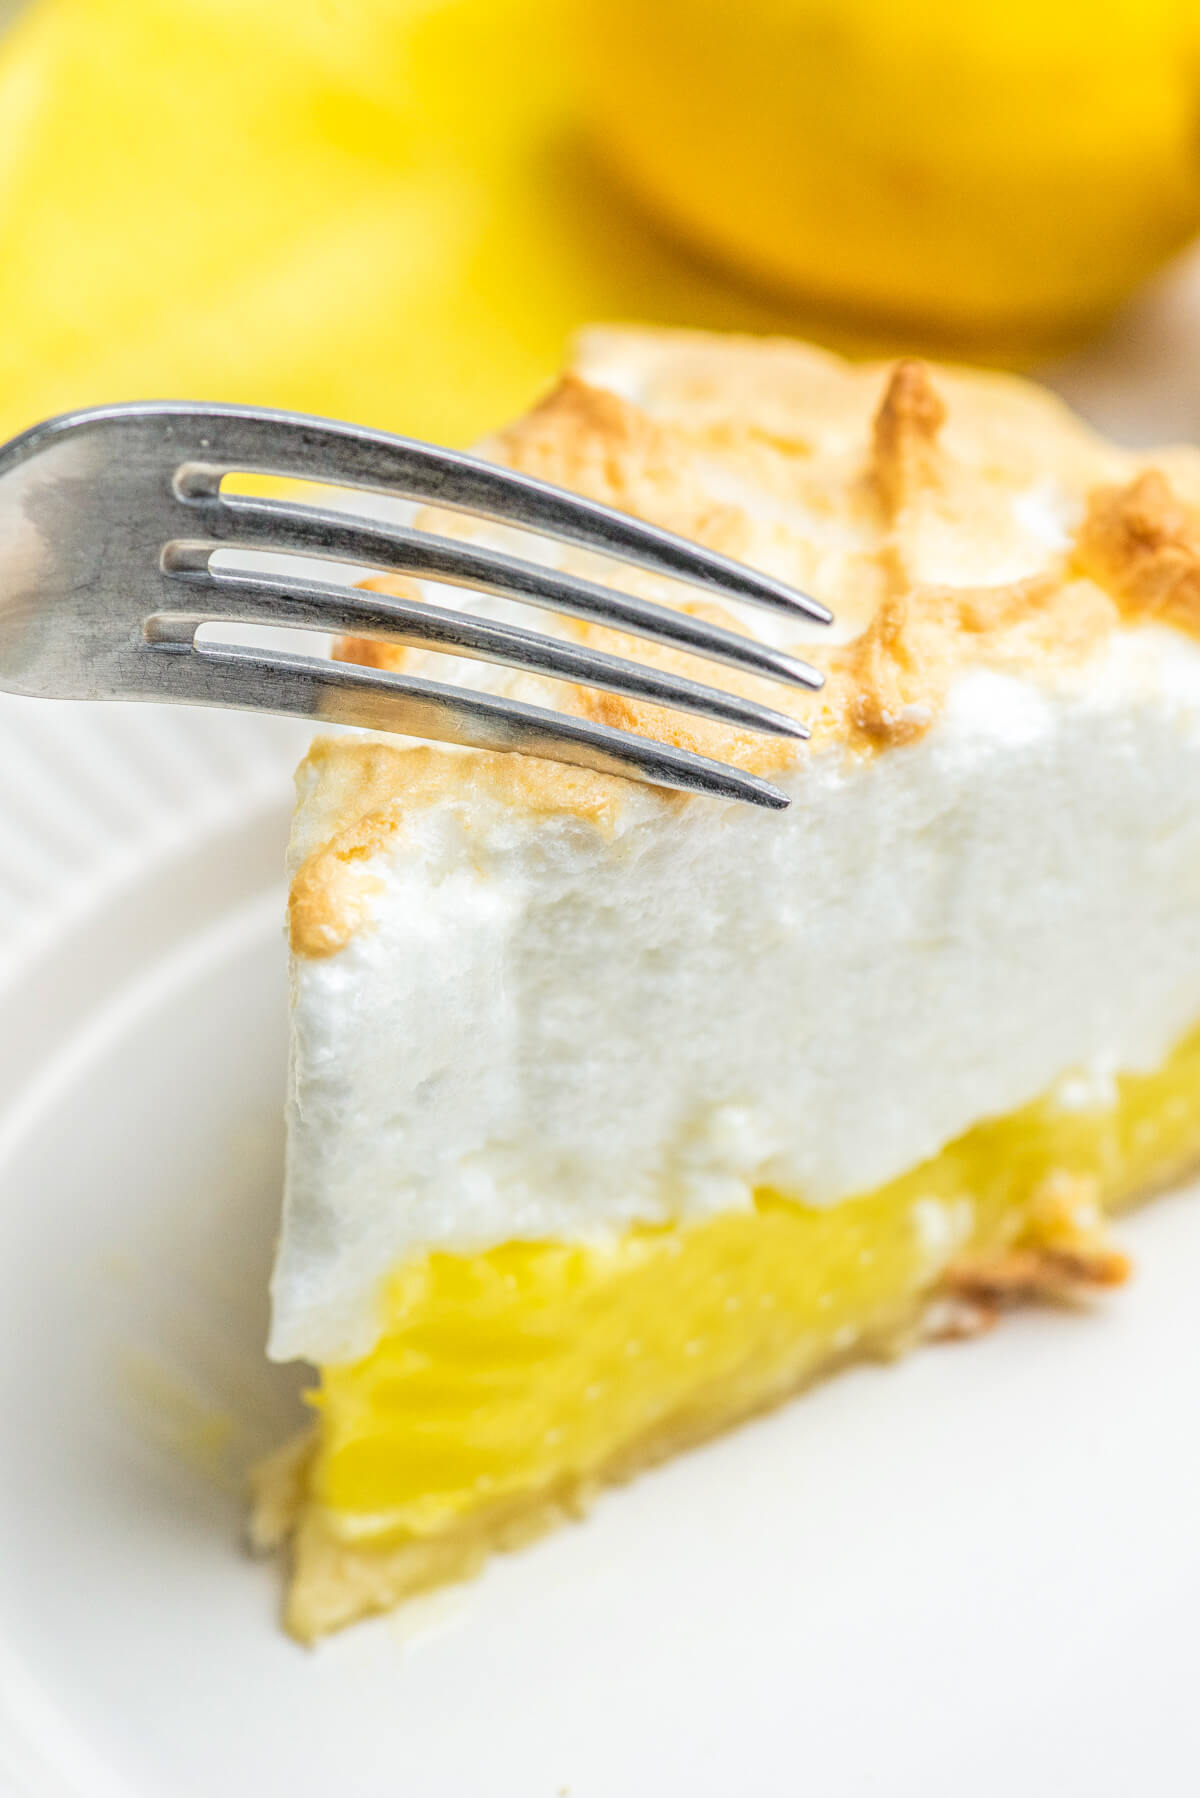 A fork about to cut into a slice of lemon meringue pie.